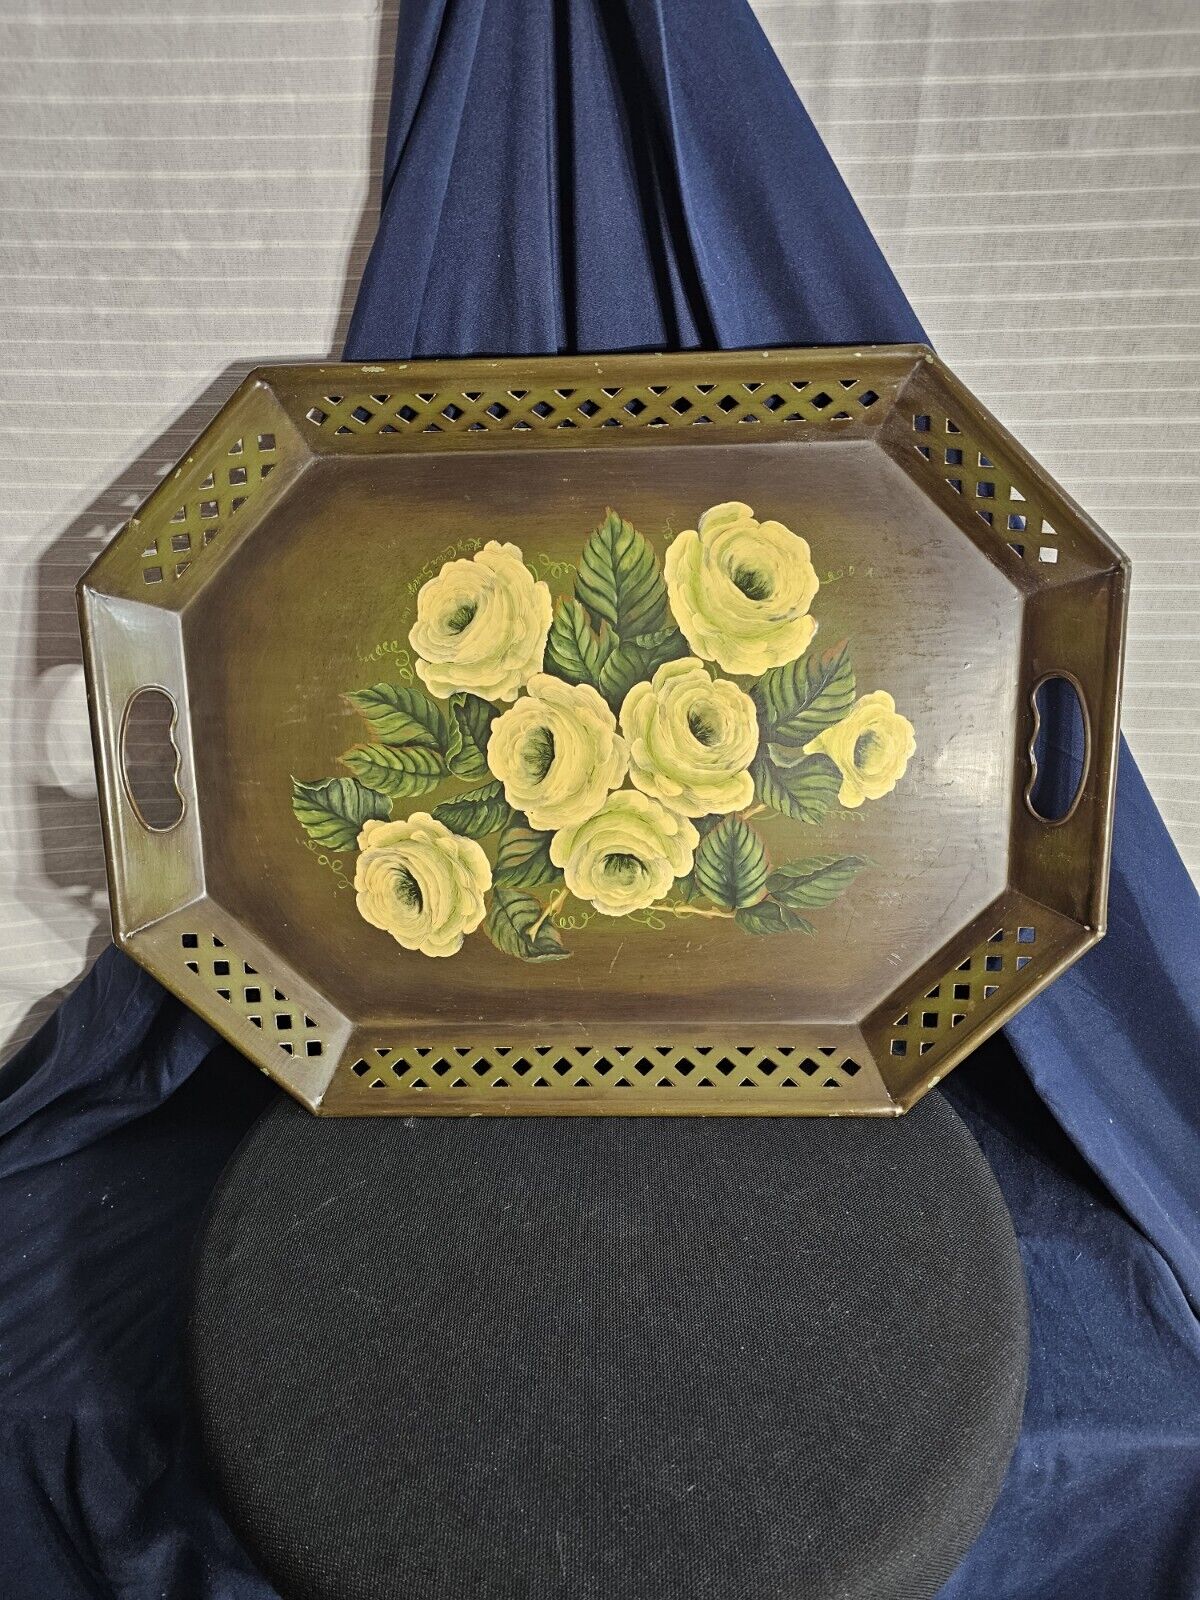 VTG Cottage Metal Serving Tray w/ Hand Painted Floral Lattice Edge 20”x15” Nice